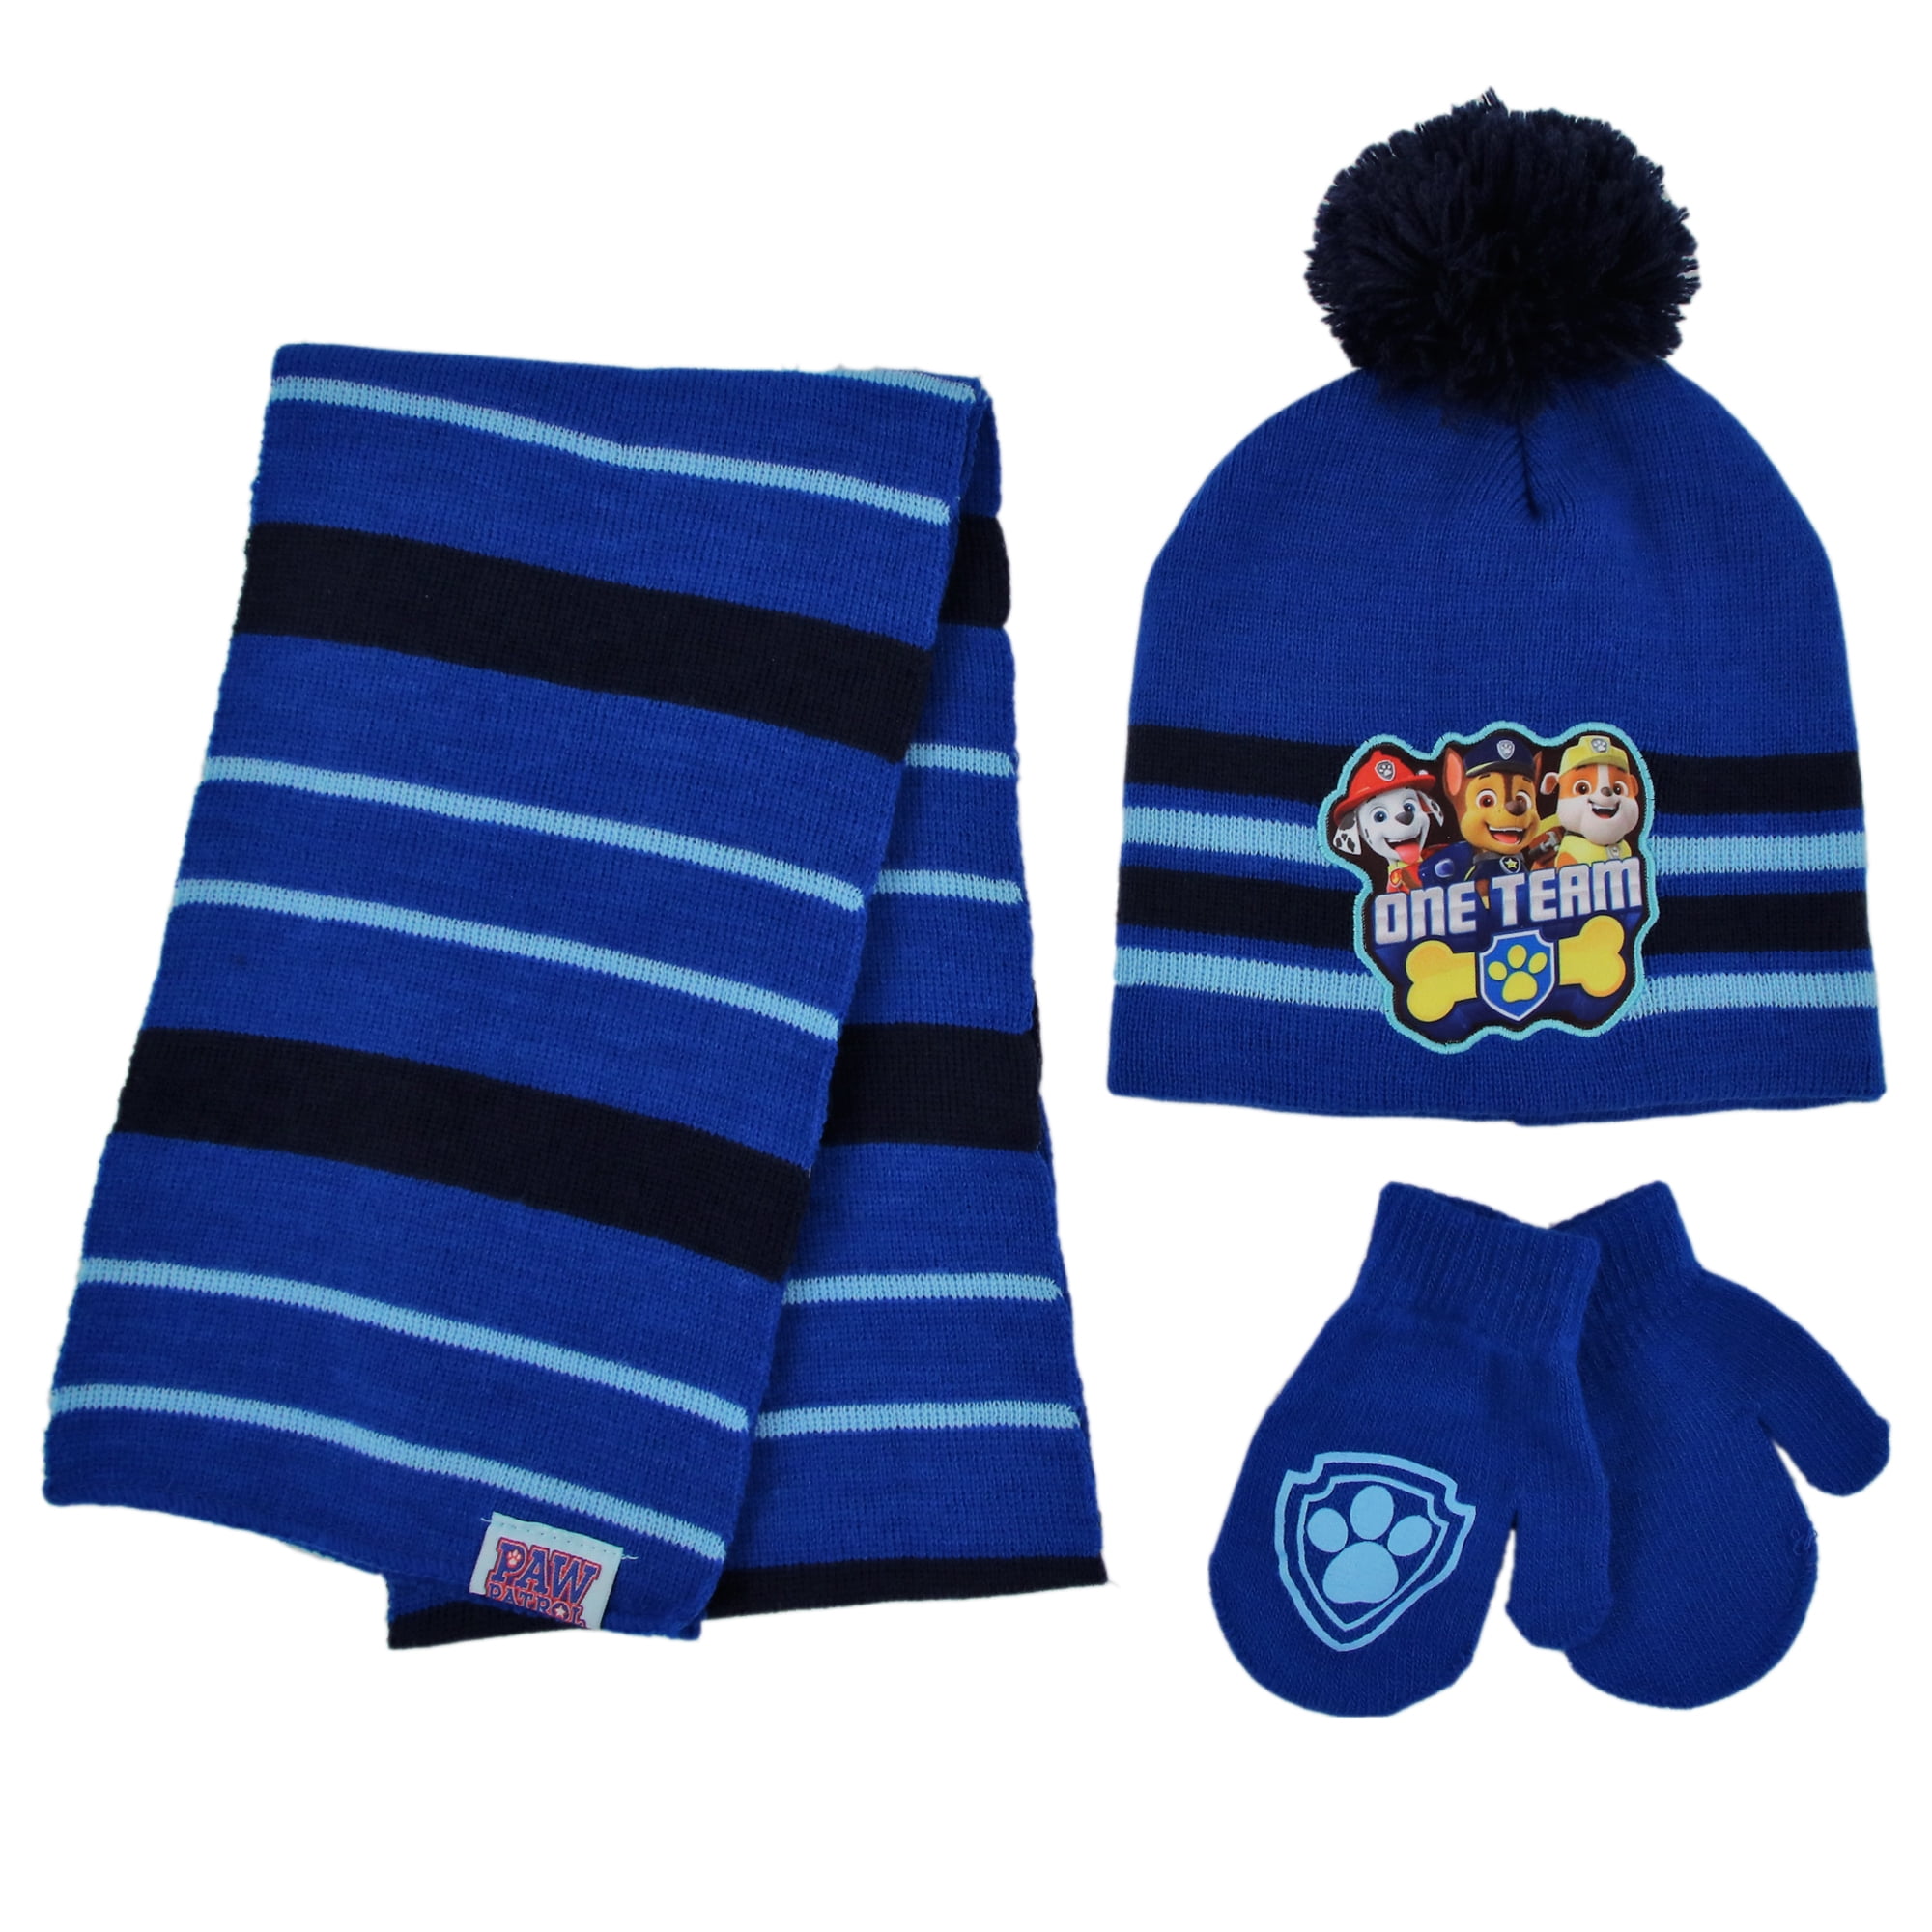 Nickelodeon Boys Toddler Paw Patrol Character Beanie Hat and Mittens Set